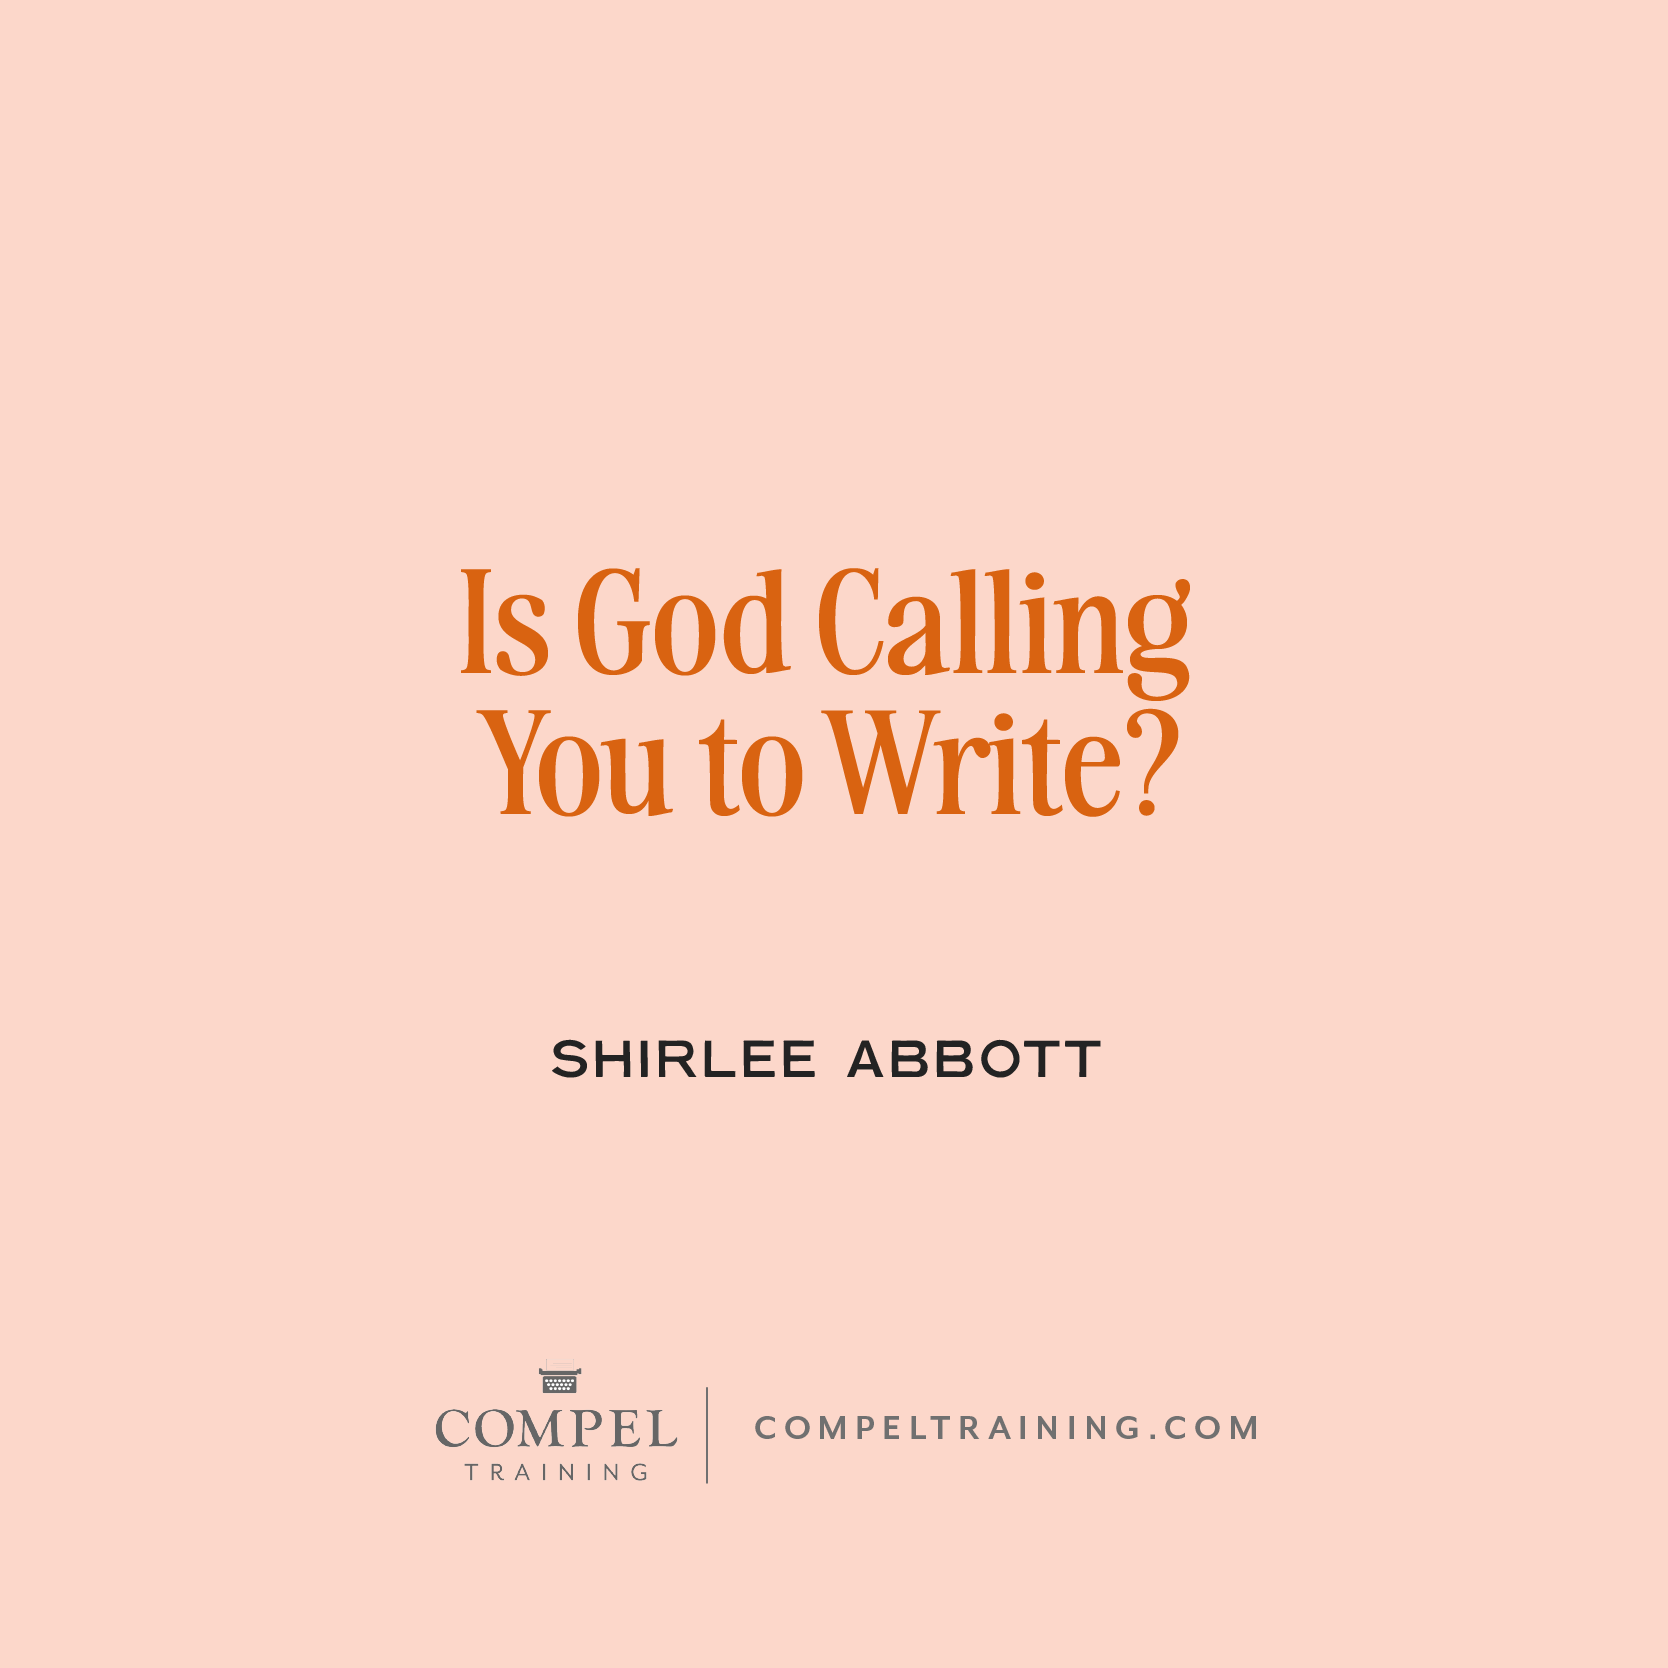 Do you feel called to write, but you aren’t sure if the desire was placed there by God or if it’s something others have told you? This can happen to all of us at some time or another. If you are struggling to walk into the calling to write, questioning whether the desire is directly from Him, here are a few thoughts to help …